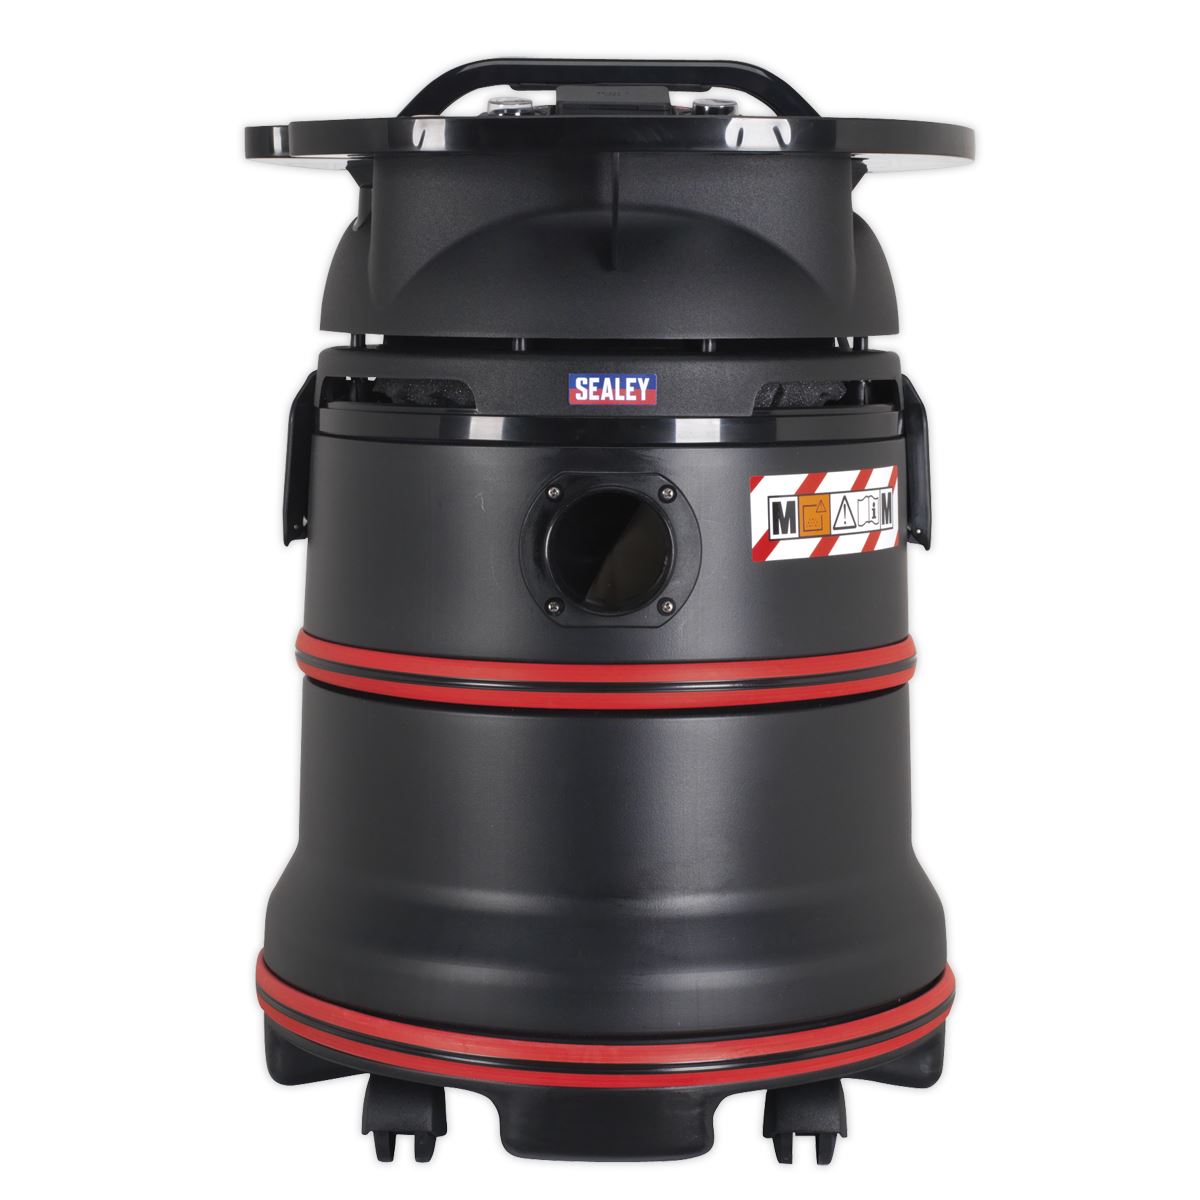 Sealey Vacuum Cleaner Industrial Wet/Dry 35L 1200W/230V Plastic Drum M Class Filtration Self-Clean Filter